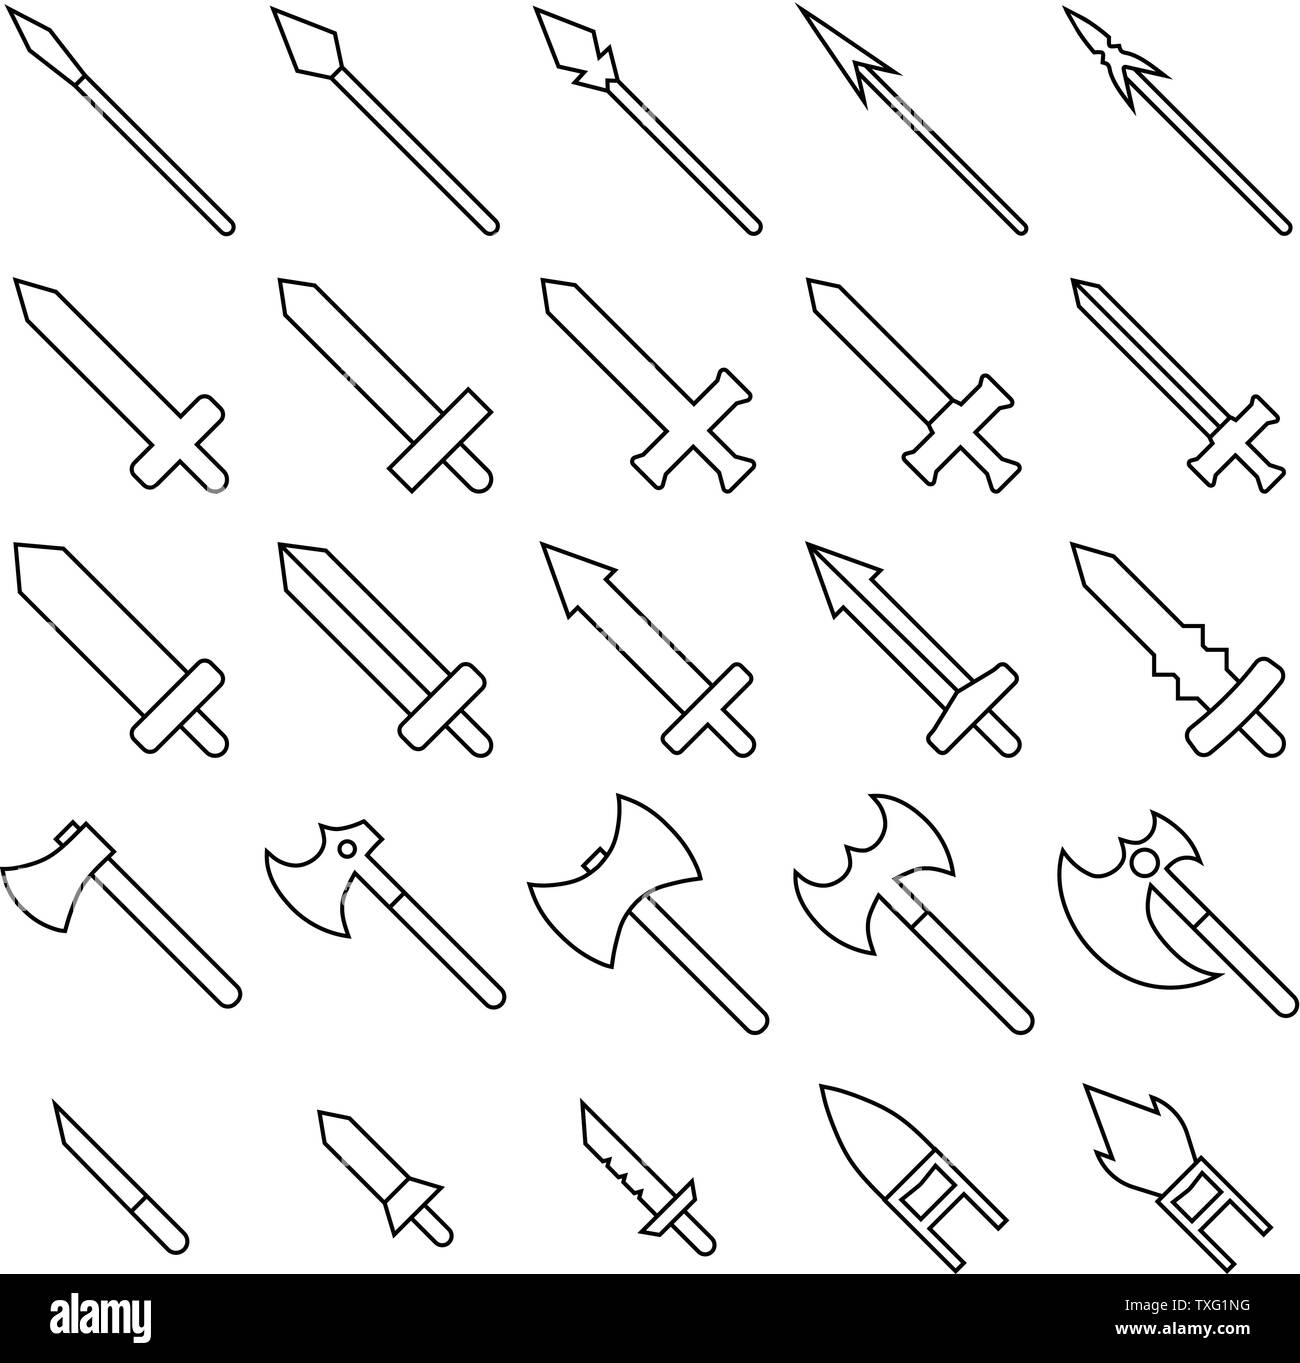 Set of 25 outline weapon icons isolated on white background. Medieval weapon silhouette. Vector illustration for your design, game, card, web. Stock Vector